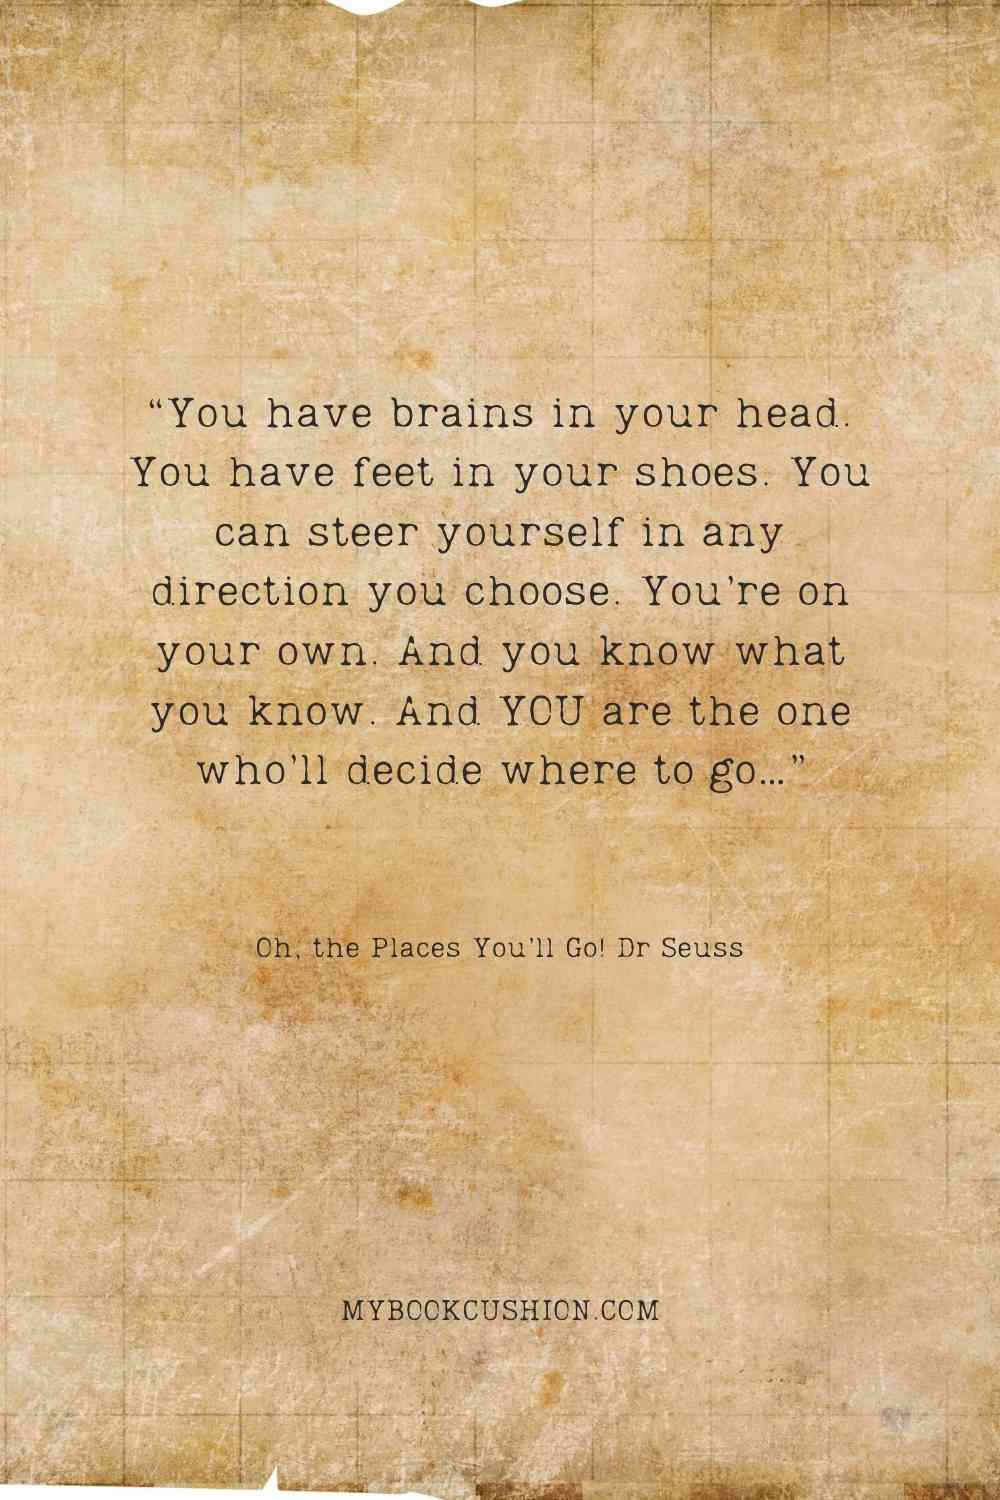 “You have brains in your head. You have feet in your shoes." -Oh, the Places You’ll Go! Dr Seuss